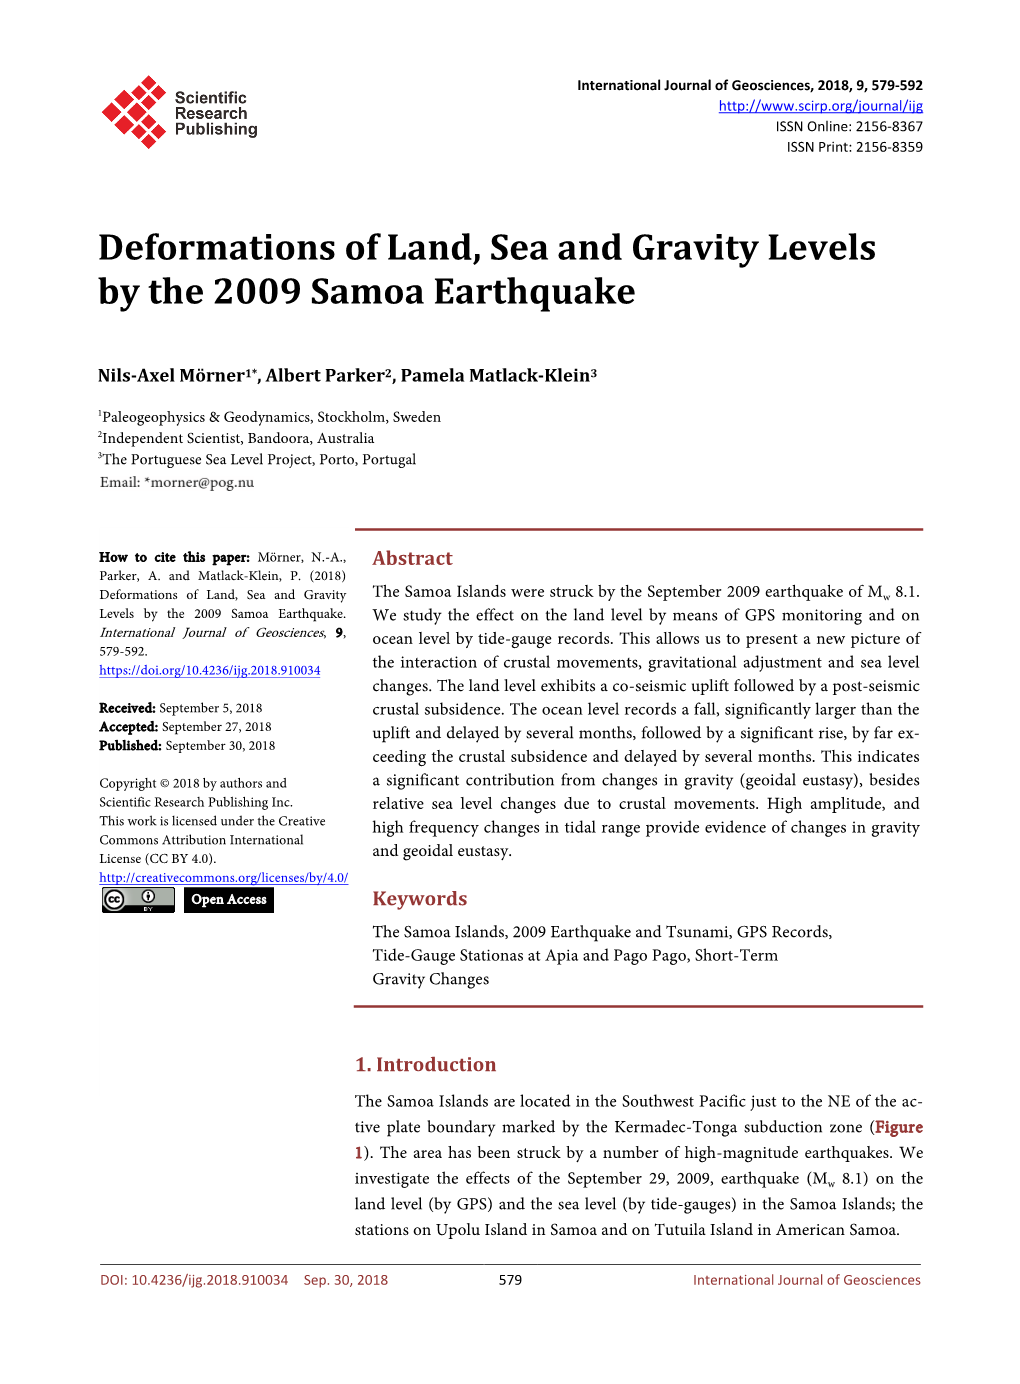 Deformations of Land, Sea and Gravity Levels by the 2009 Samoa Earthquake